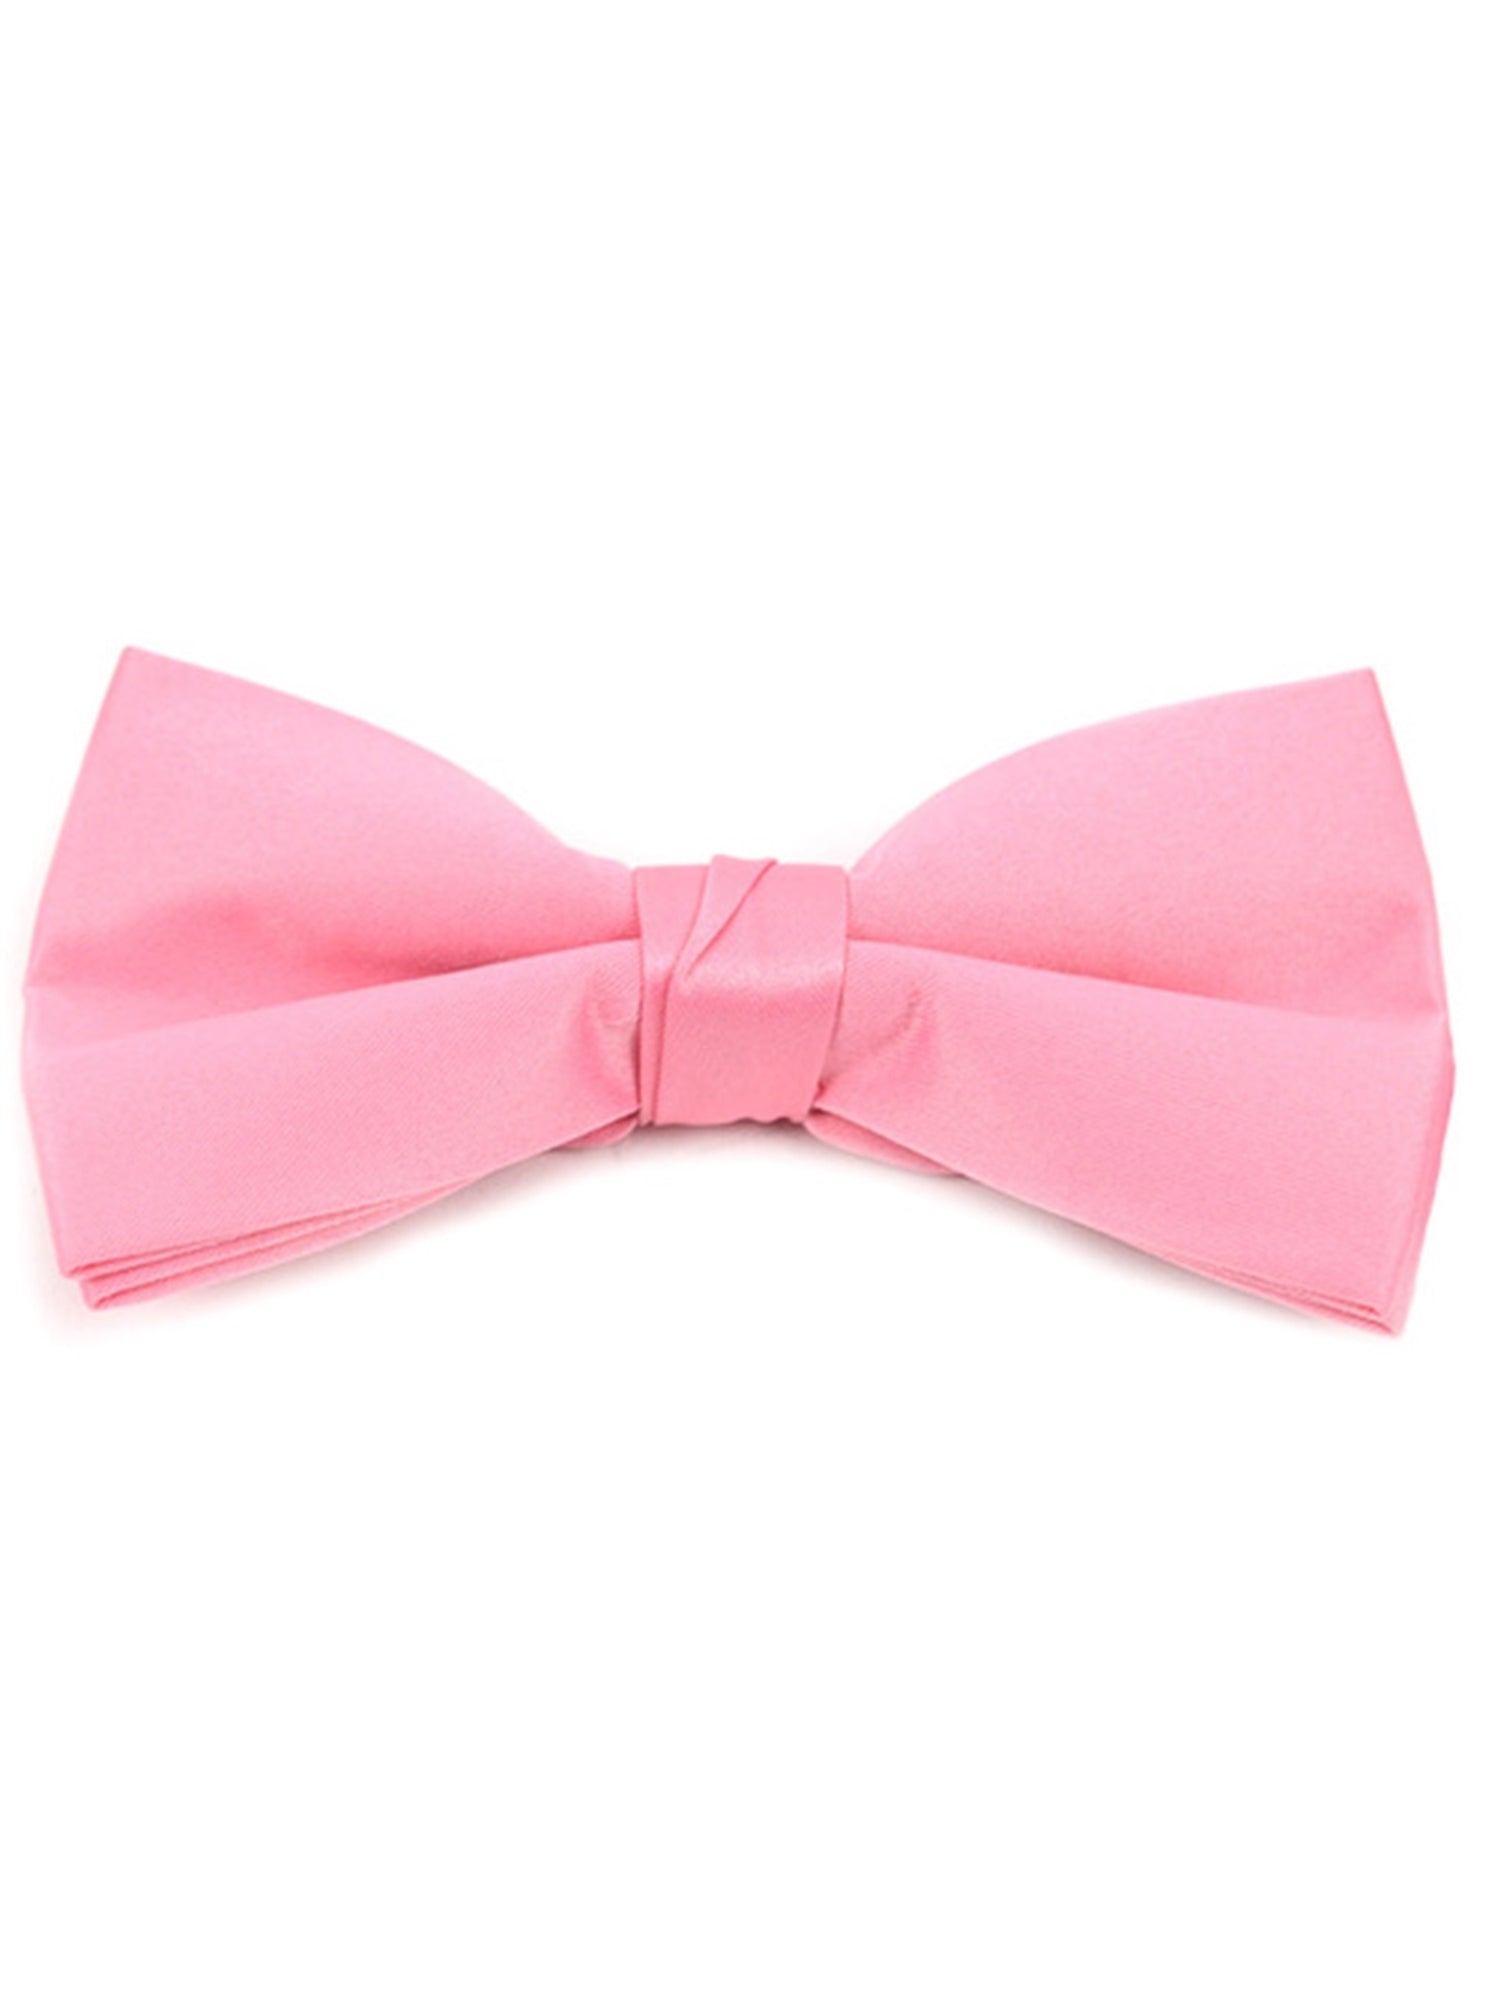 Men's Pre-tied Adjustable Length Bow Tie - Formal Tuxedo Solid Color Men's Solid Color Bow Tie TheDapperTie Hot Pink One Size 